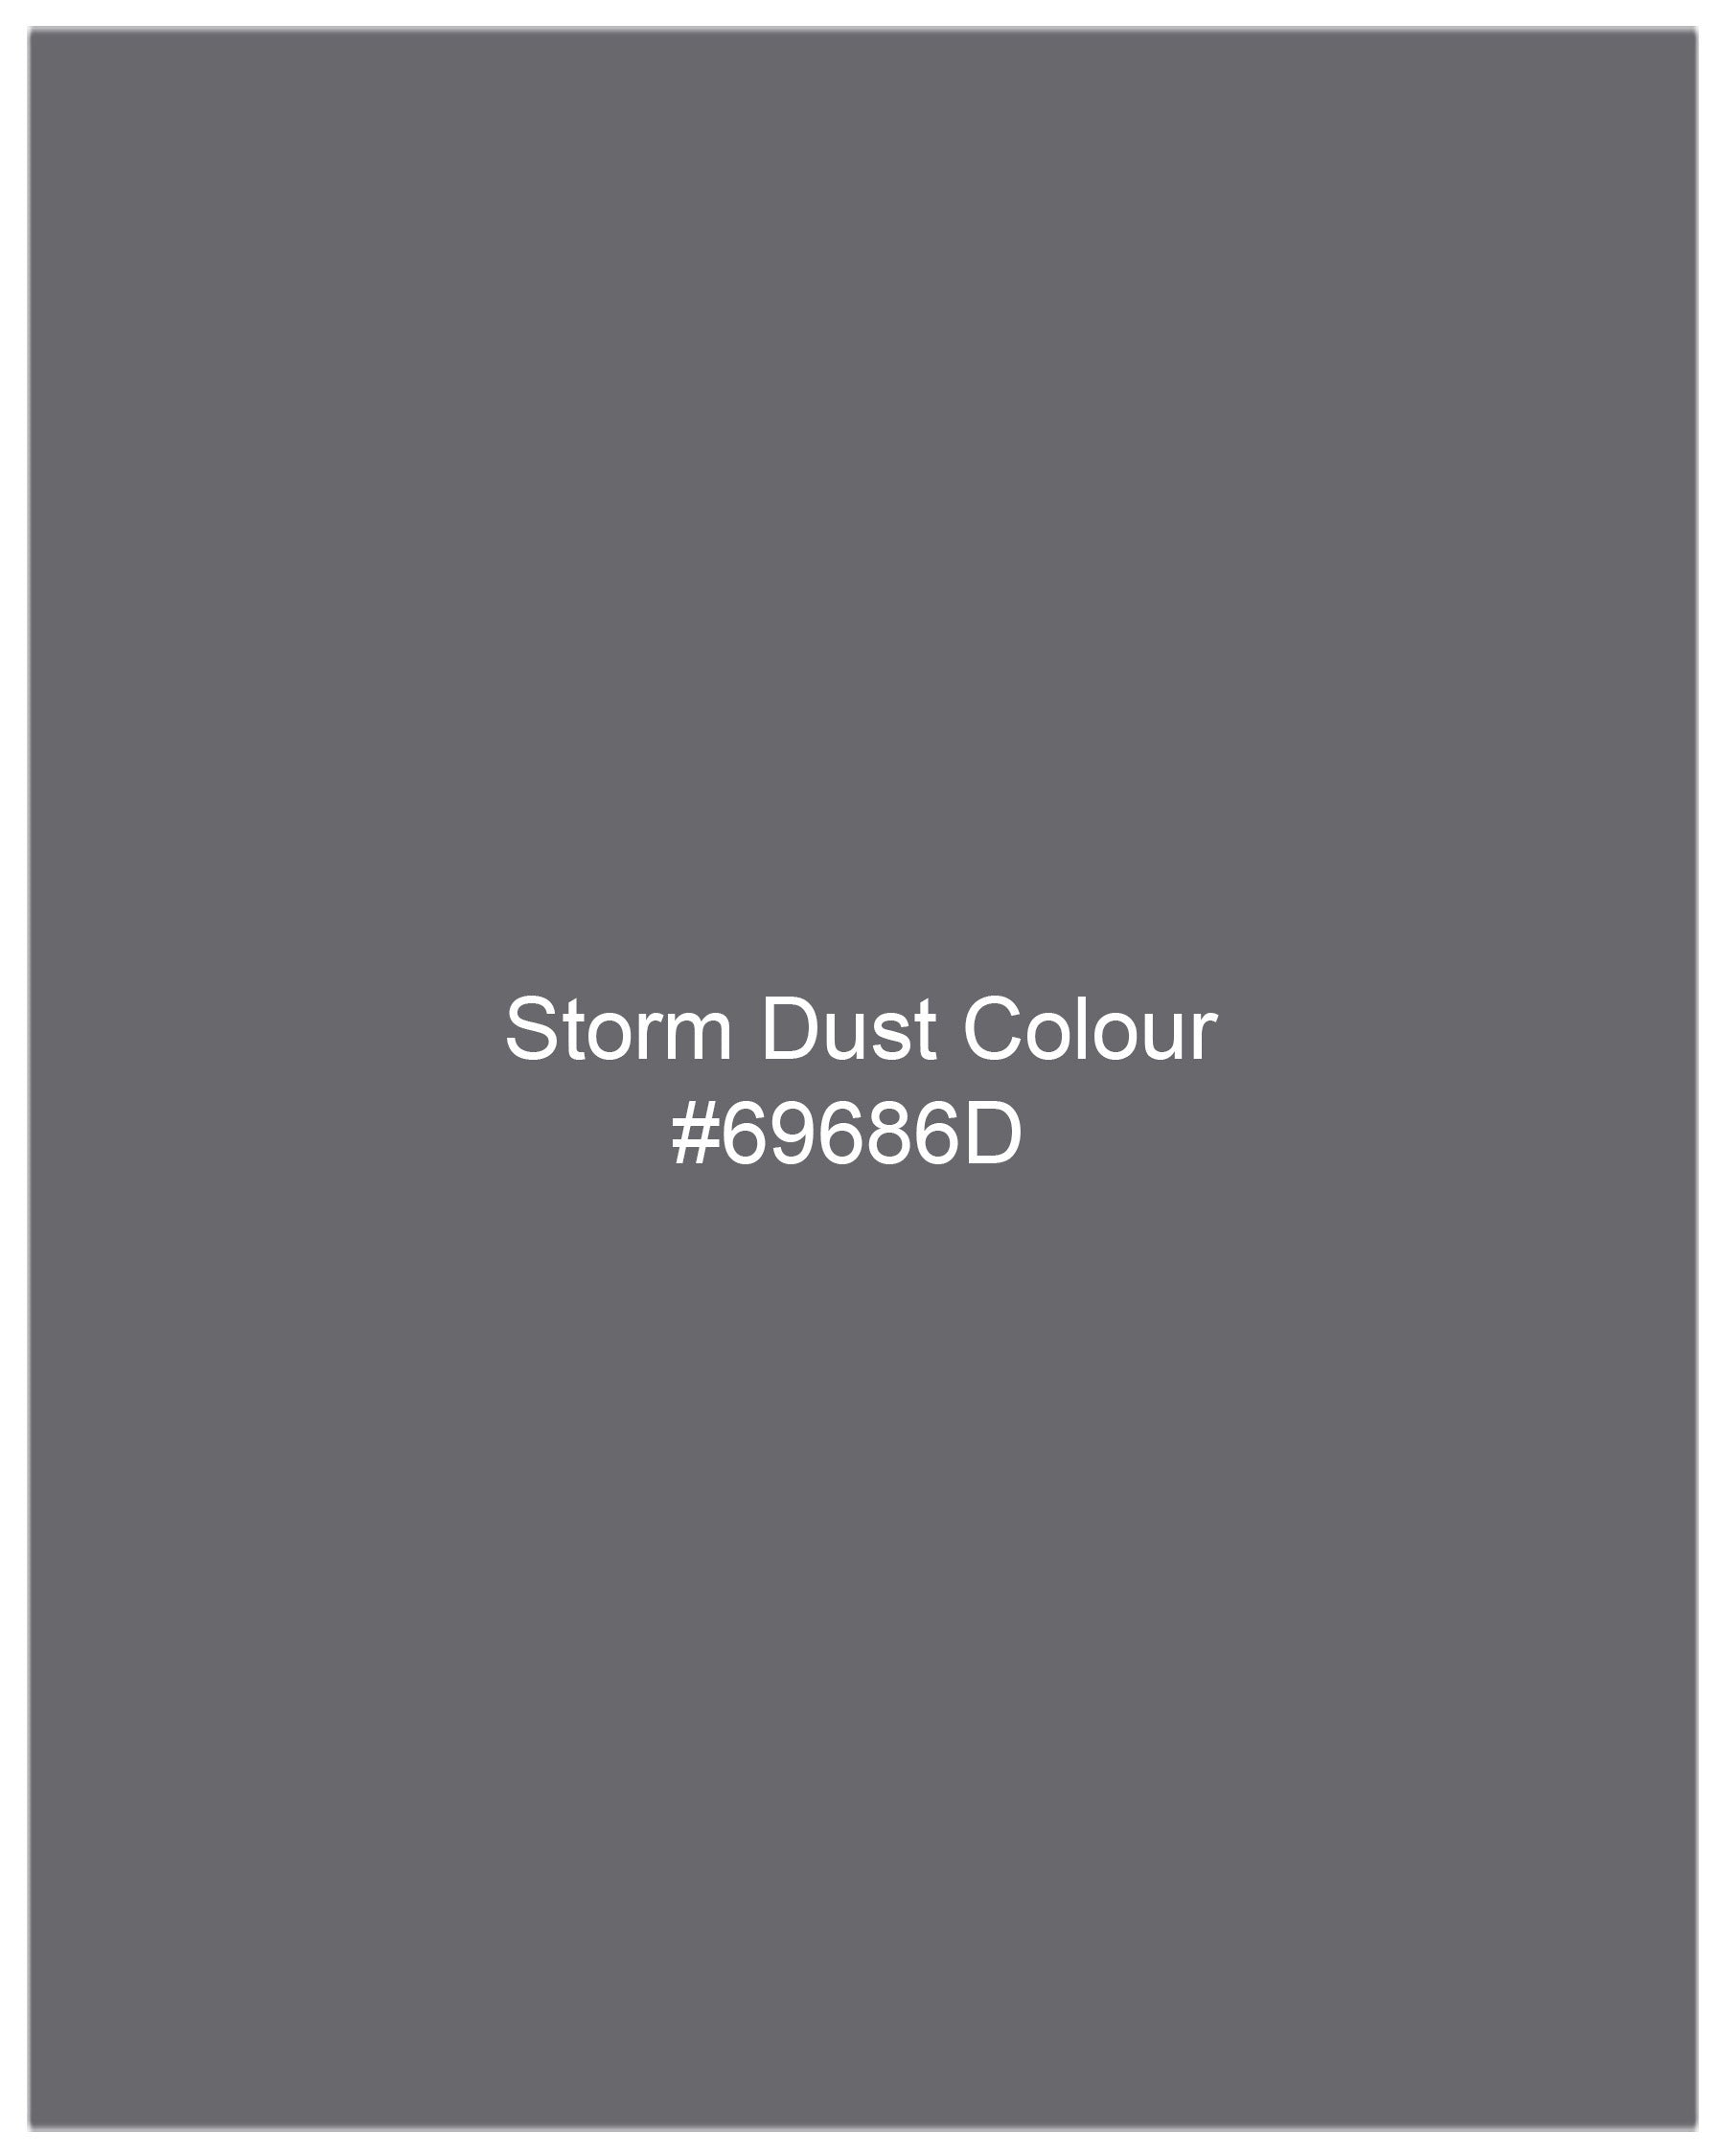 Storm Dust Gray Single Breasted Trench Coat TCB2028-SB-PP-36, TCB2028-SB-PP-38, TCB2028-SB-PP-40, TCB2028-SB-PP-42, TCB2028-SB-PP-44, TCB2028-SB-PP-46, TCB2028-SB-PP-48, TCB2028-SB-PP-50, TCB2028-SB-PP-52, TCB2028-SB-PP-54, TCB2028-SB-PP-56, TCB2028-SB-PP-58, TCB2028-SB-PP-60